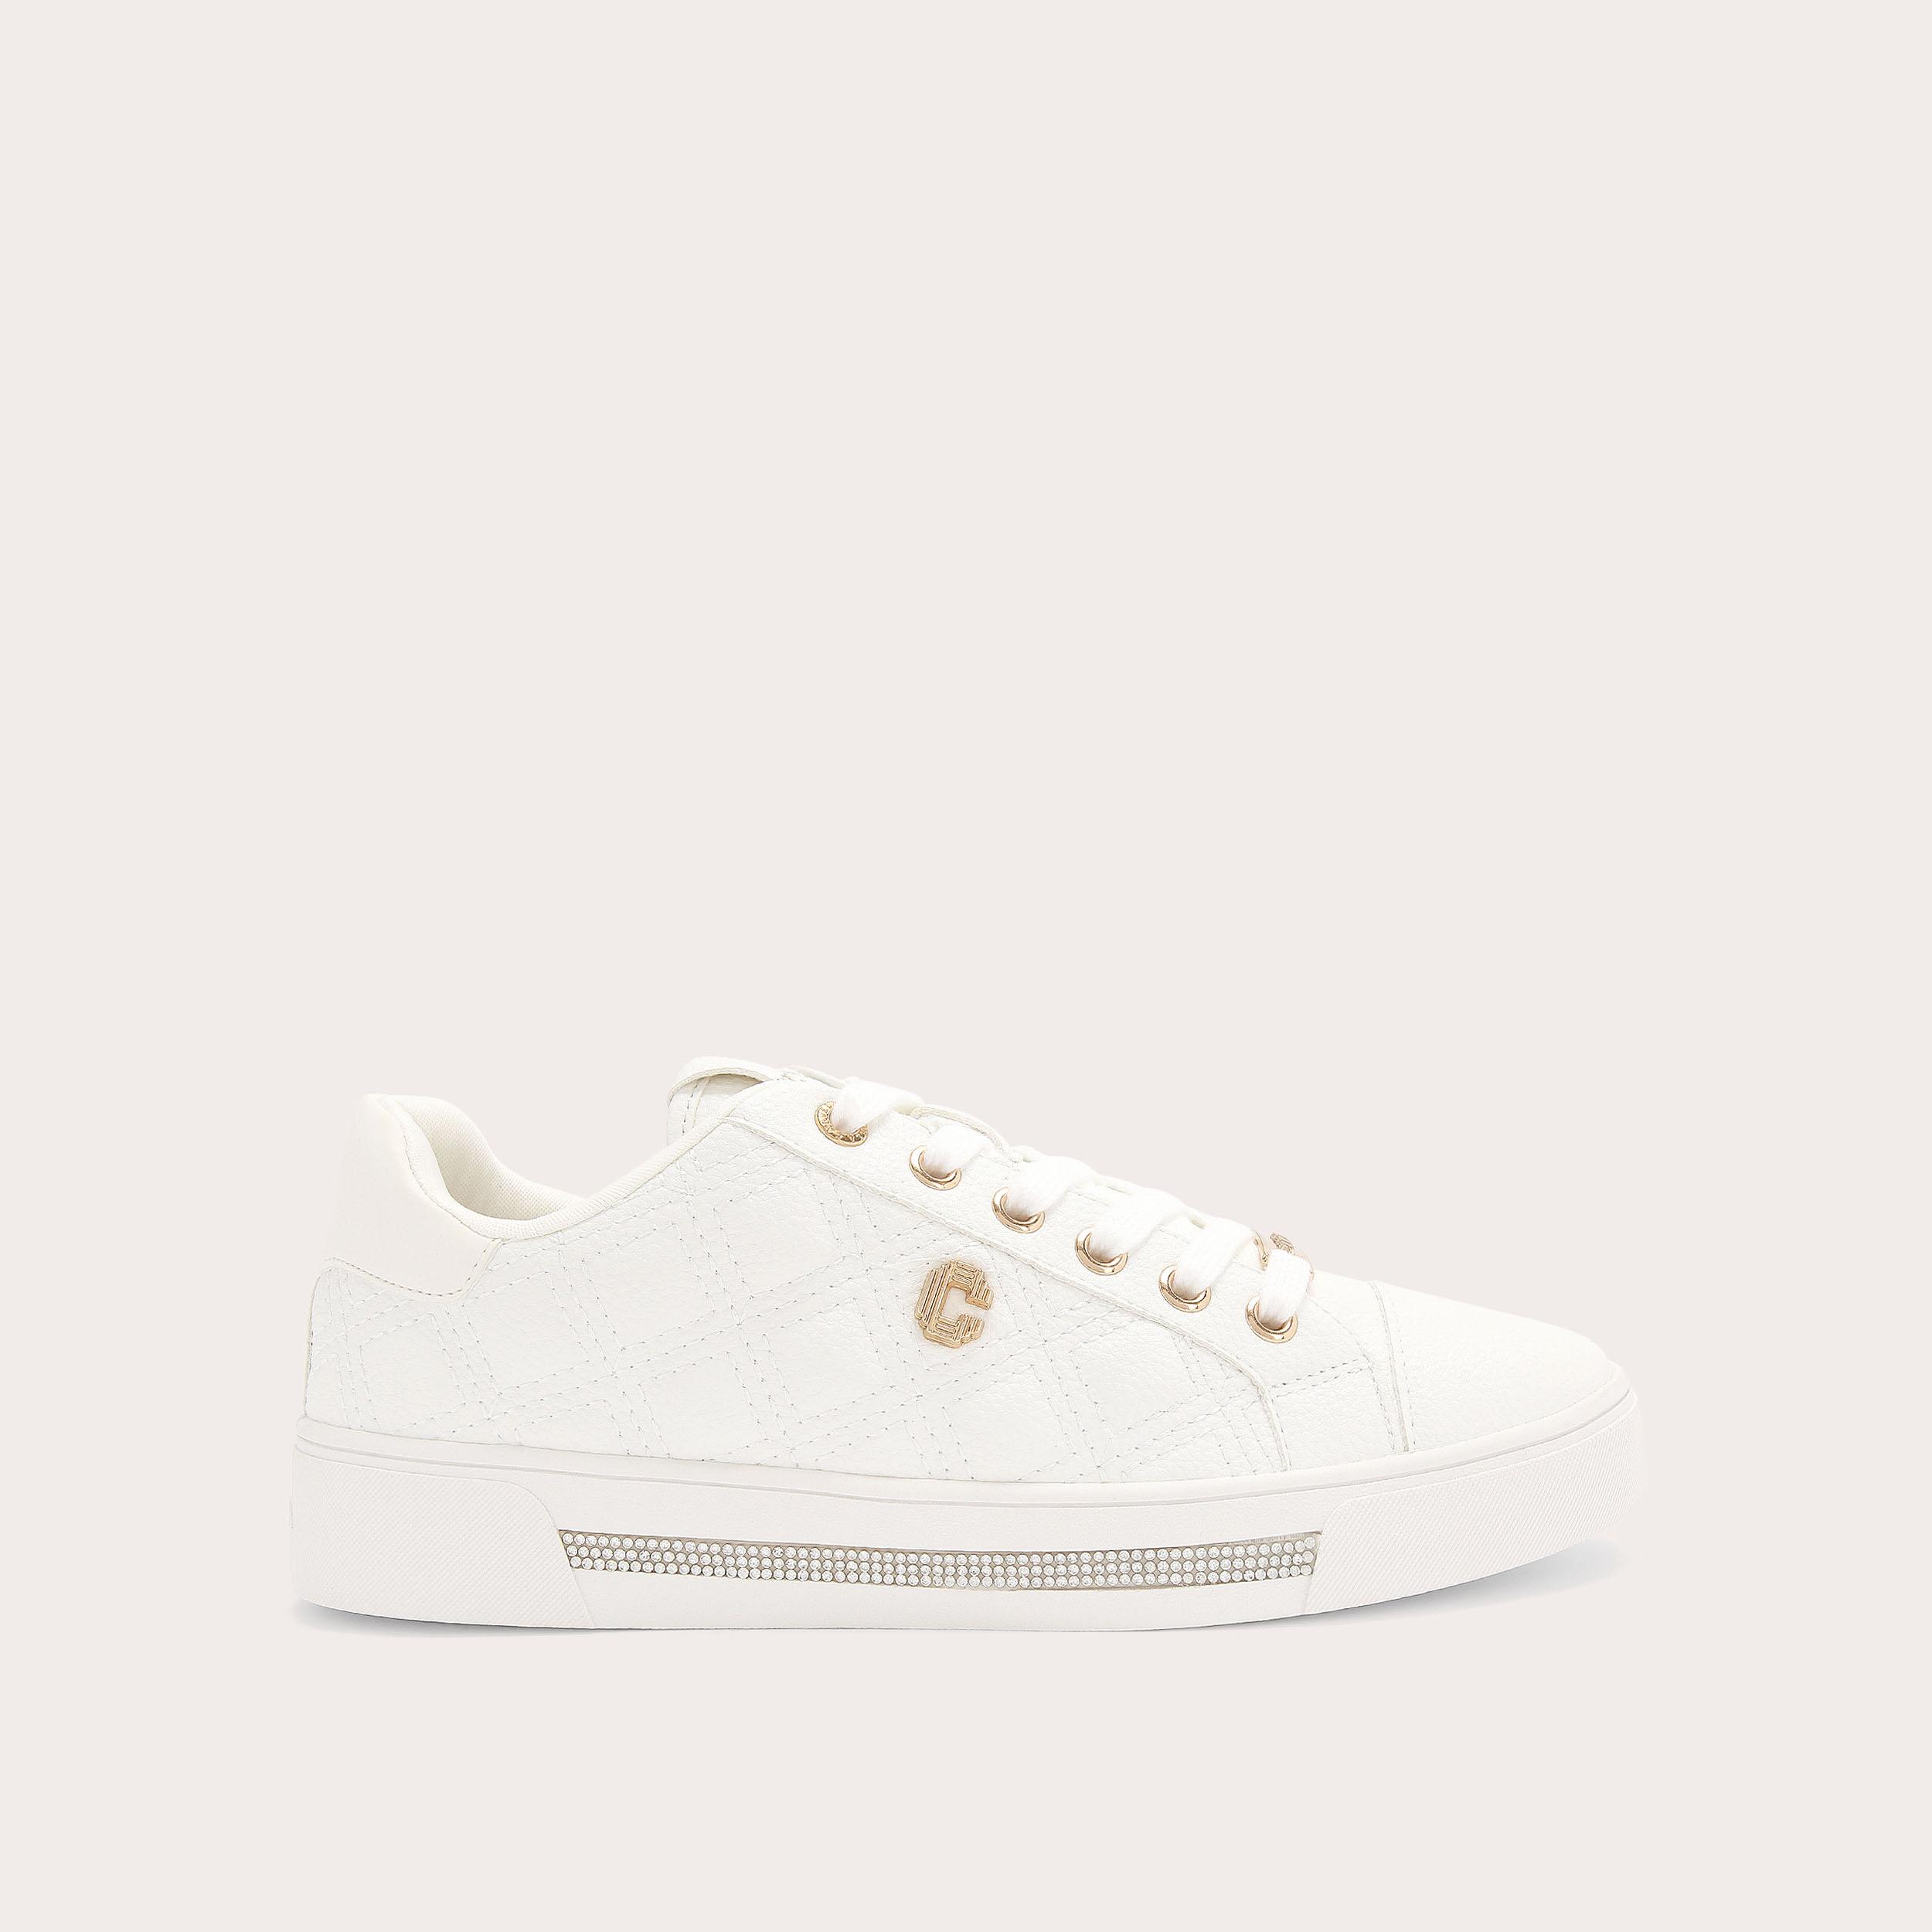 DIAMOND QUILT White Quilted Trainers by CARVELA